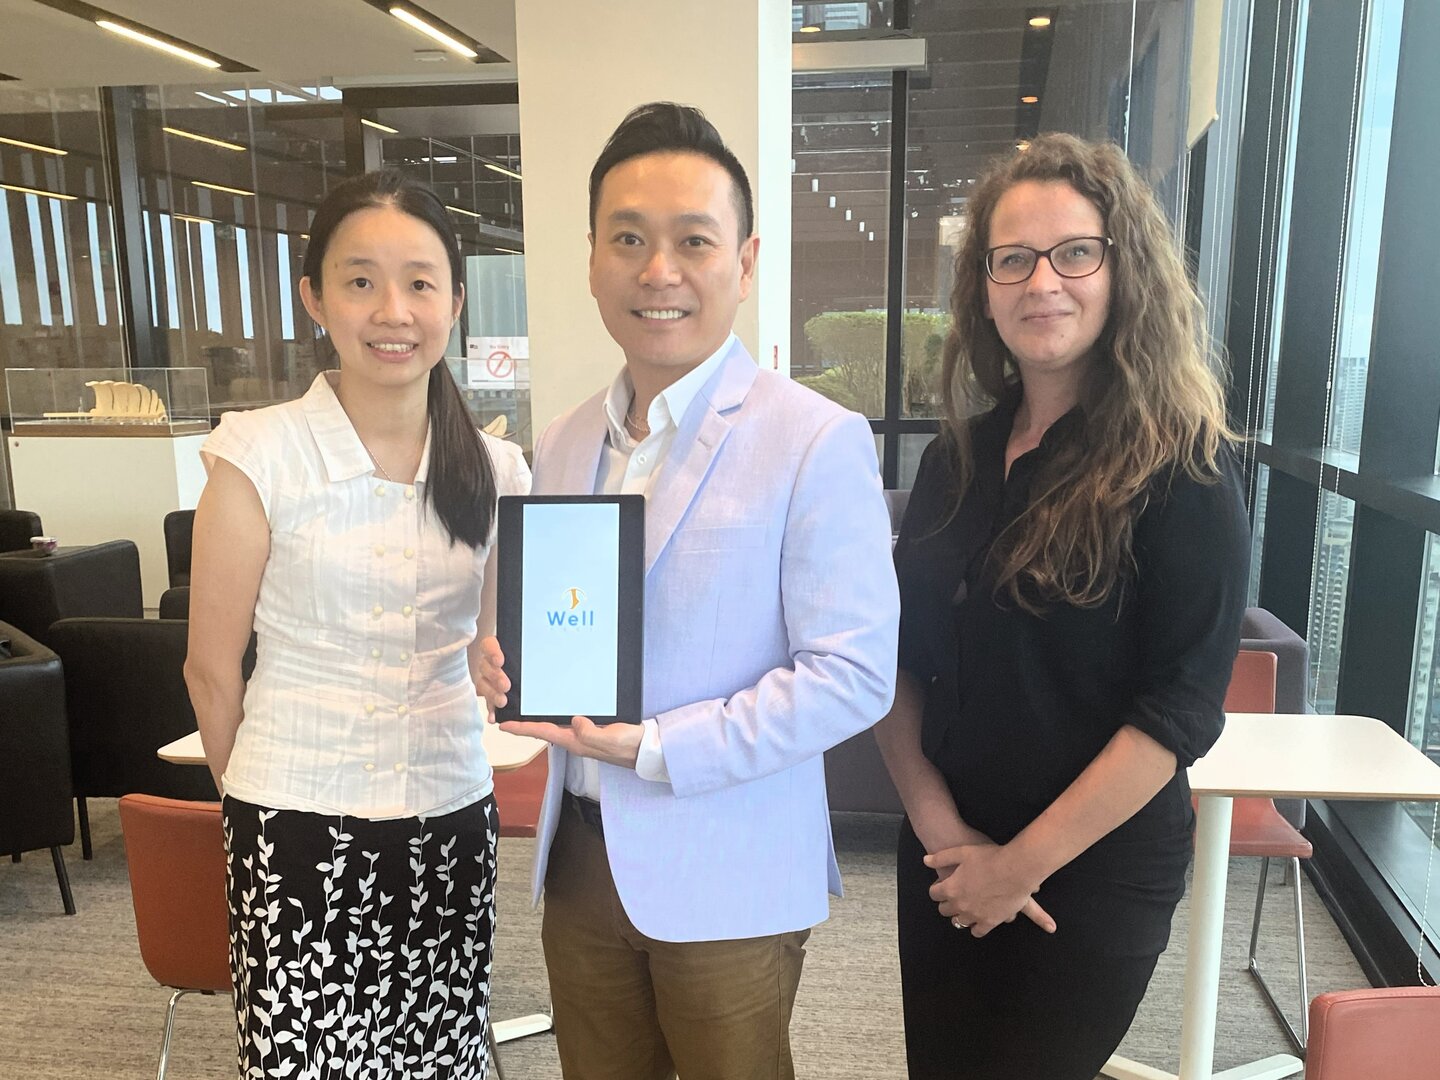 Tan Tock Seng Hospital Senior Consultant Dr Liew Huiling, Assoc Prof Andy Ho Hau Yan, and Research Fellow Dr Anita Pienkowska, posing with the WellFeet app.